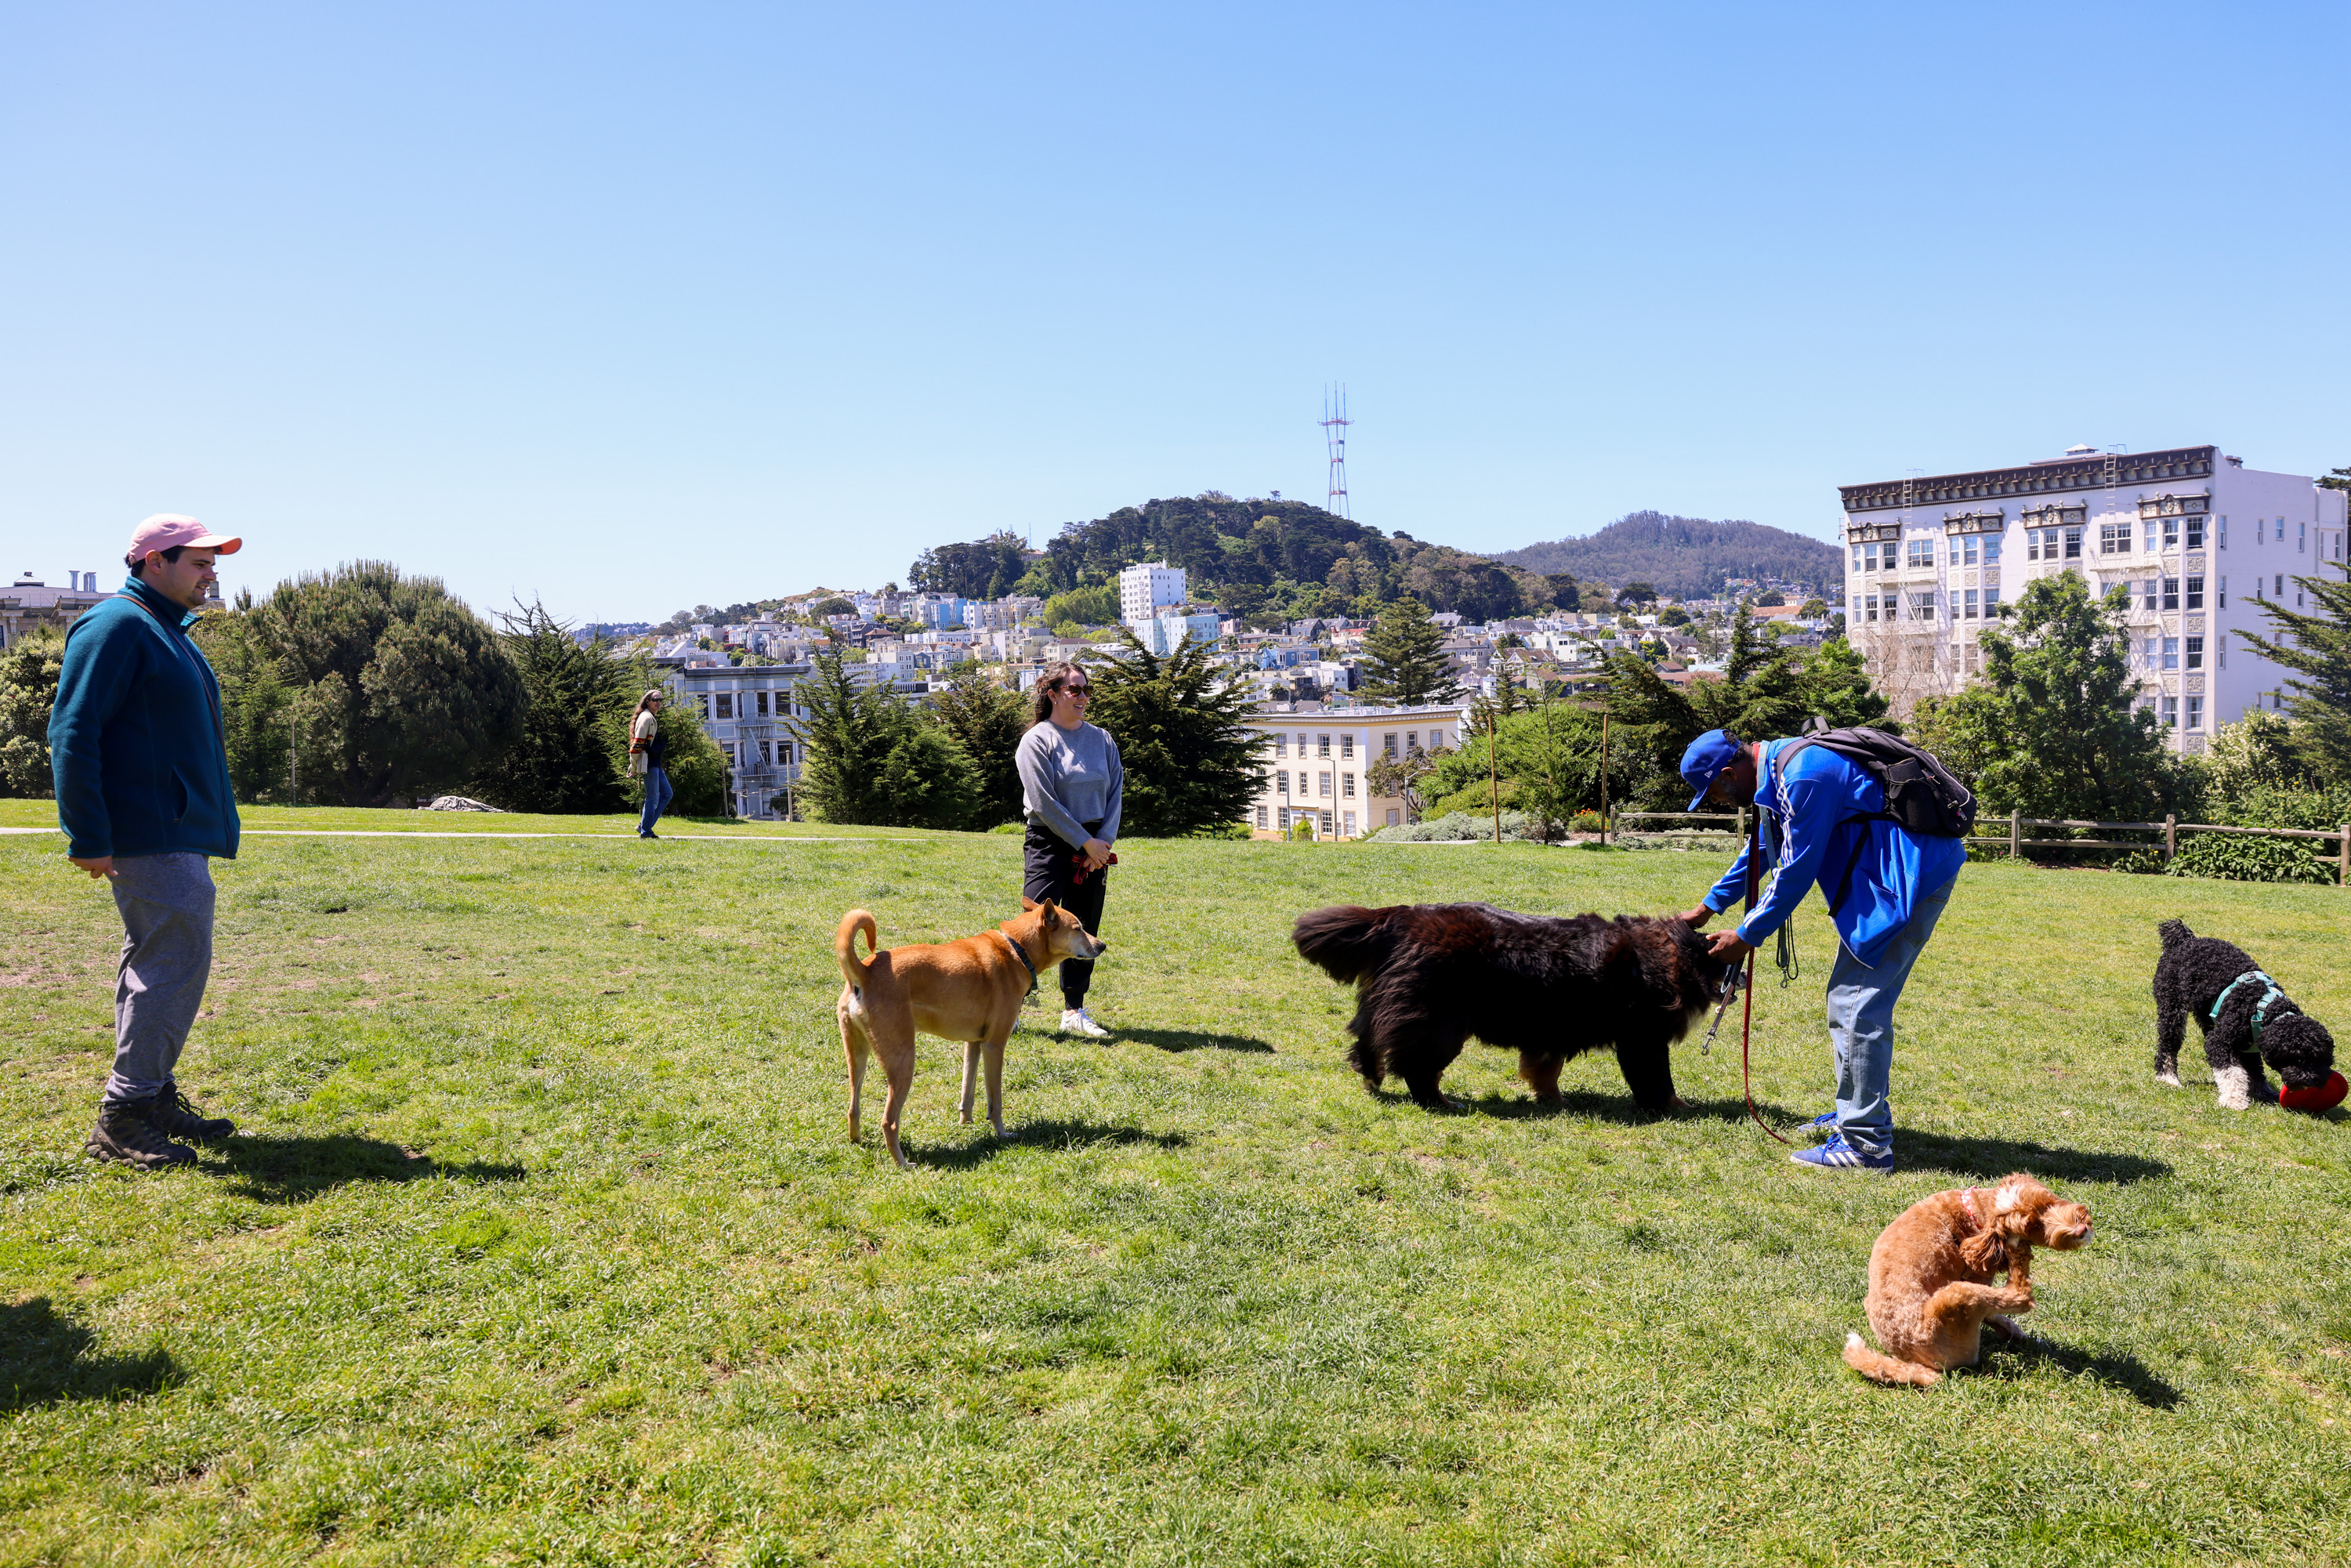 People with dogs in a sunny park with city and hills in the background.